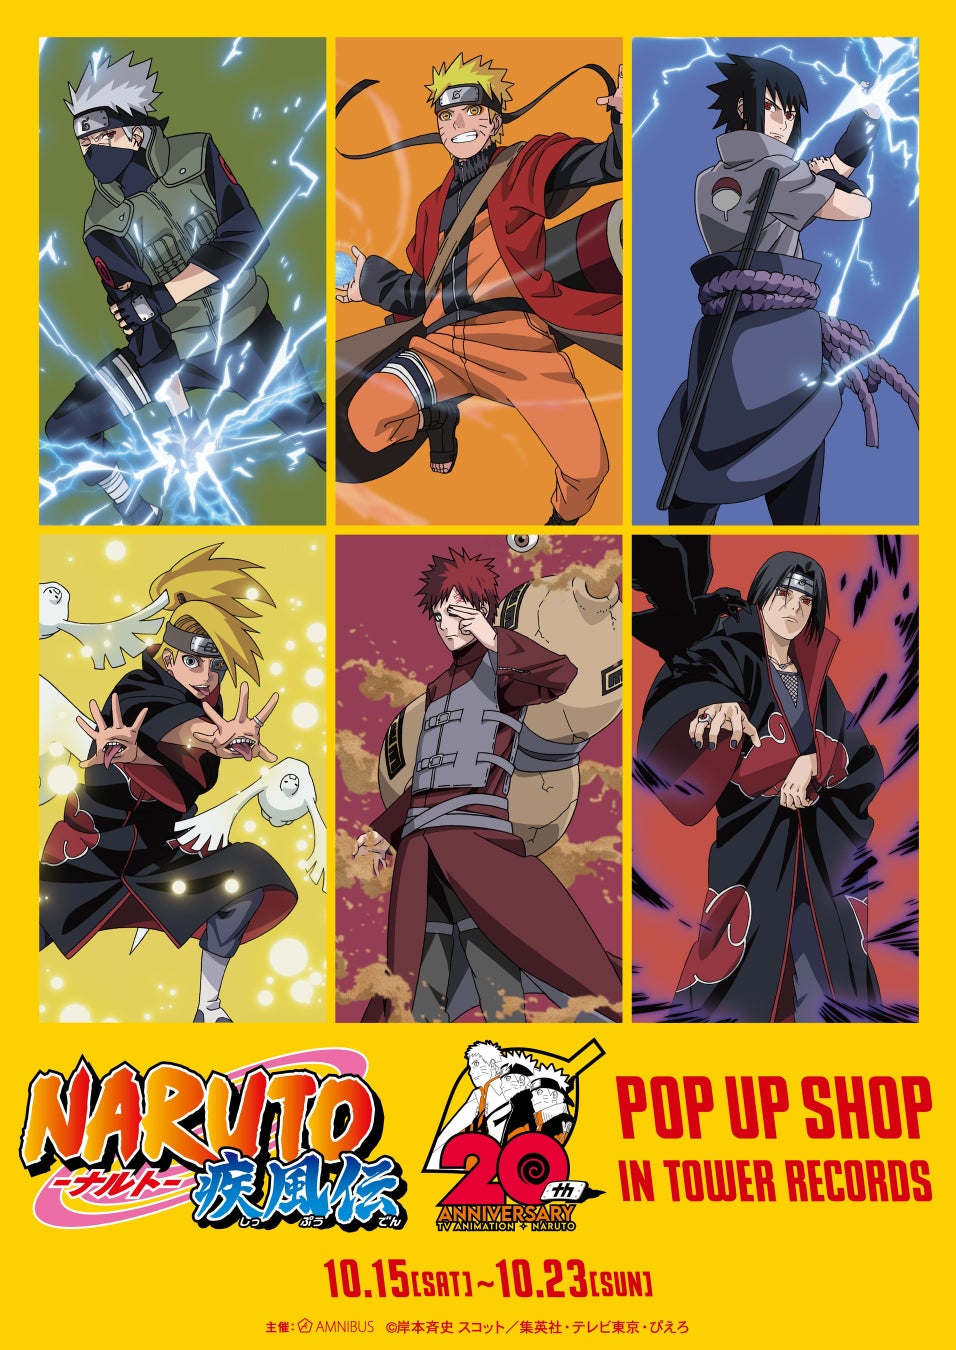 『NARUTO-ナルト- 疾風伝』のイベント「NARUTO -ナルト- 疾風伝 20th Anniversary POP UPSHOP in TOWER RECORDS」の開催が決定！